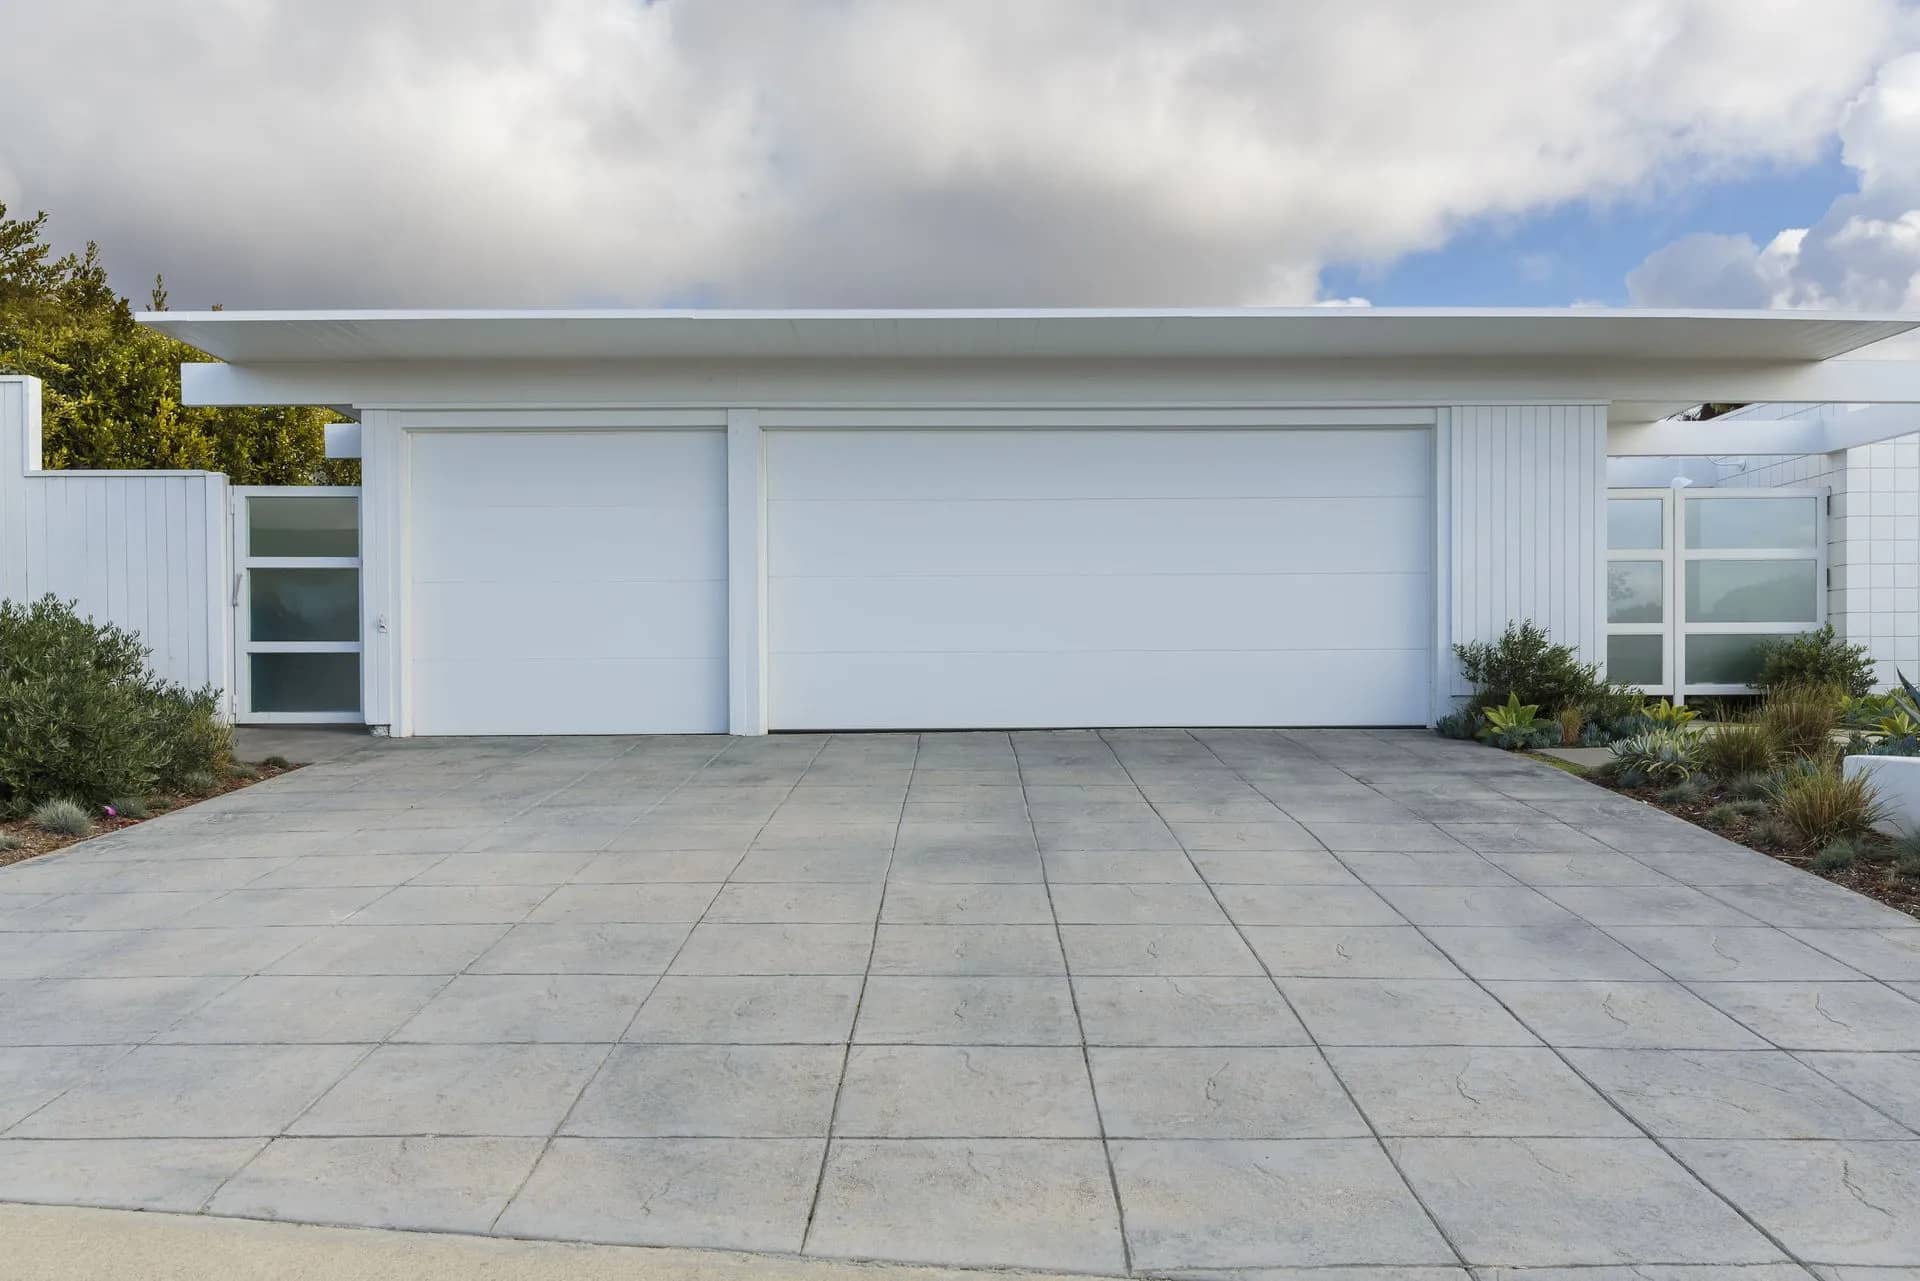 Common Problems Seen With Three-Car Garages